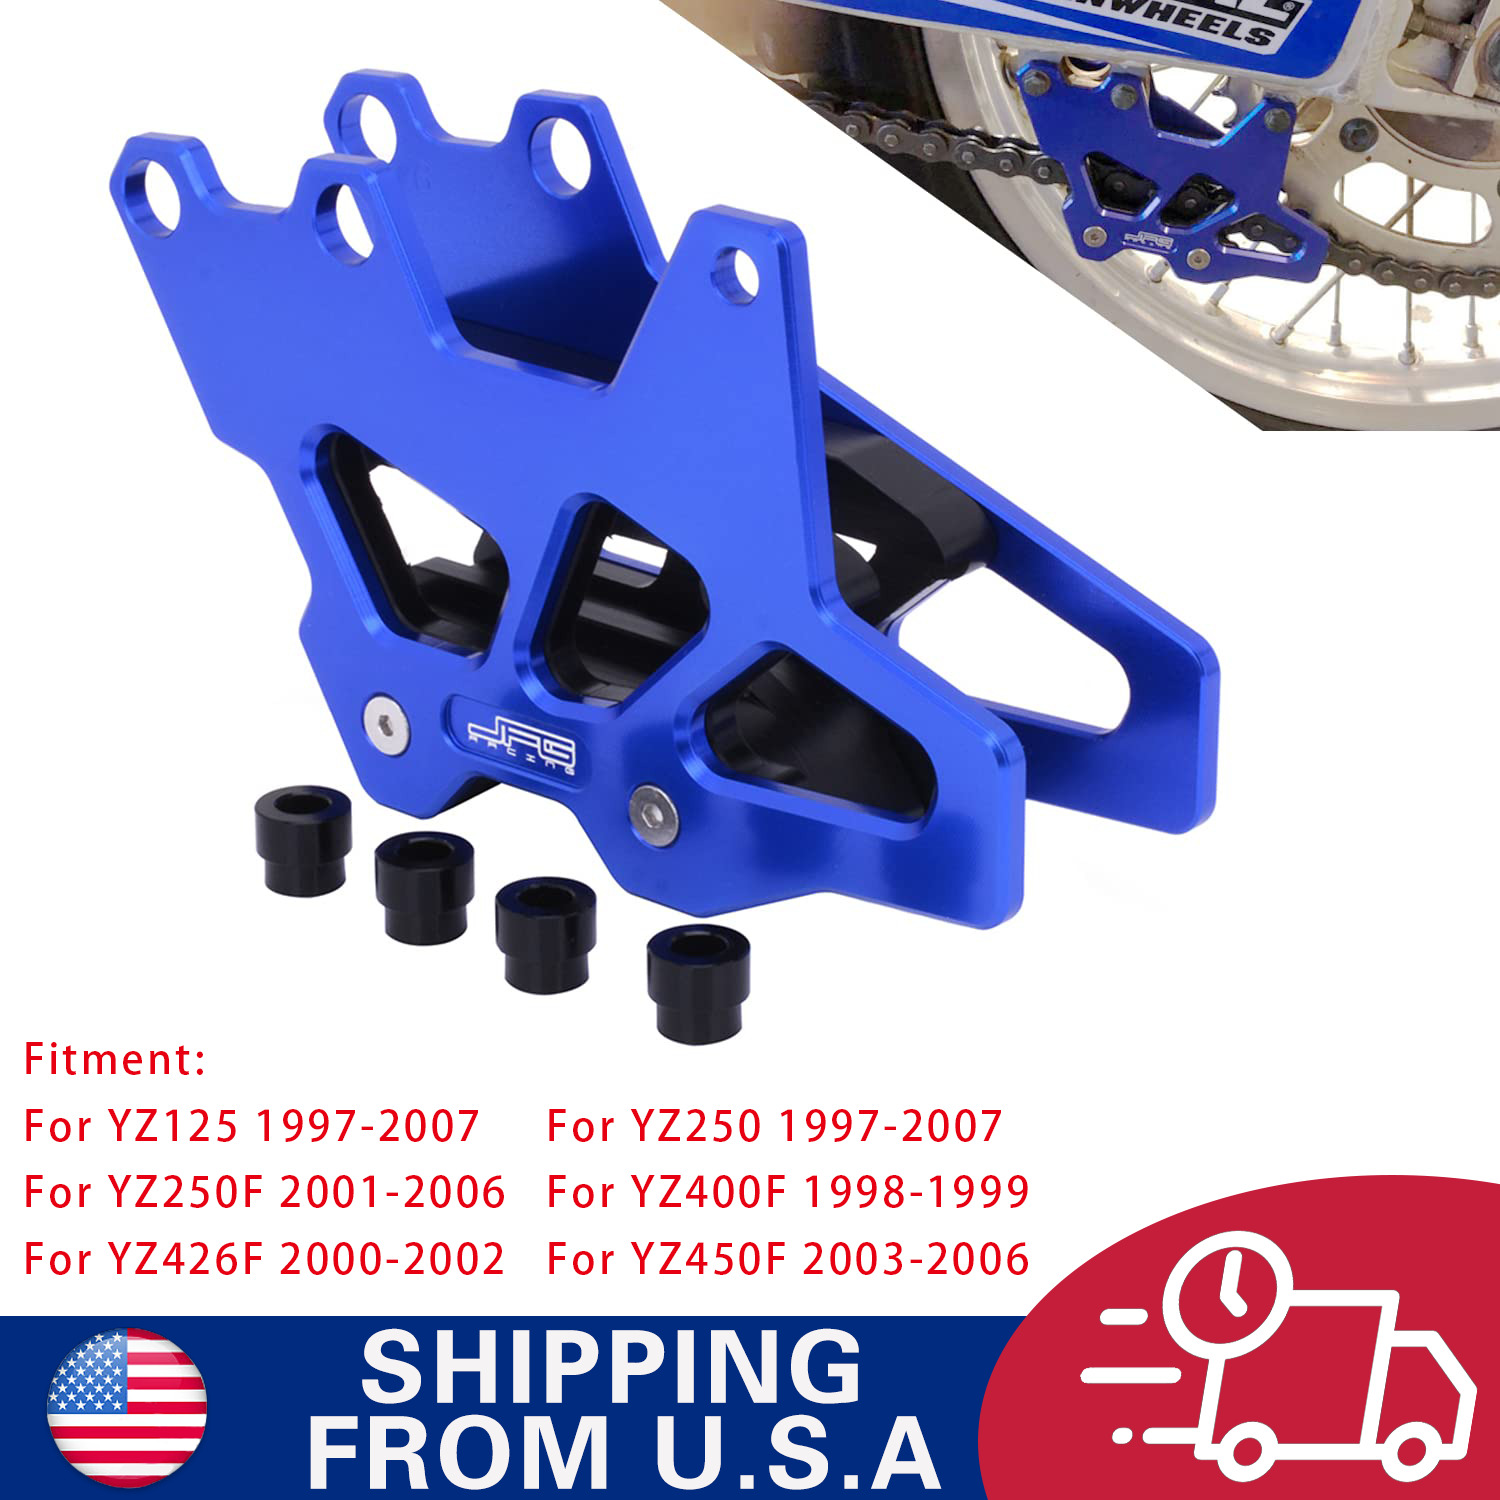 CNC Chain Guard Guide Protector For YZ125 YZ250 1997-2007 YZ250F 2001-2006 Blue